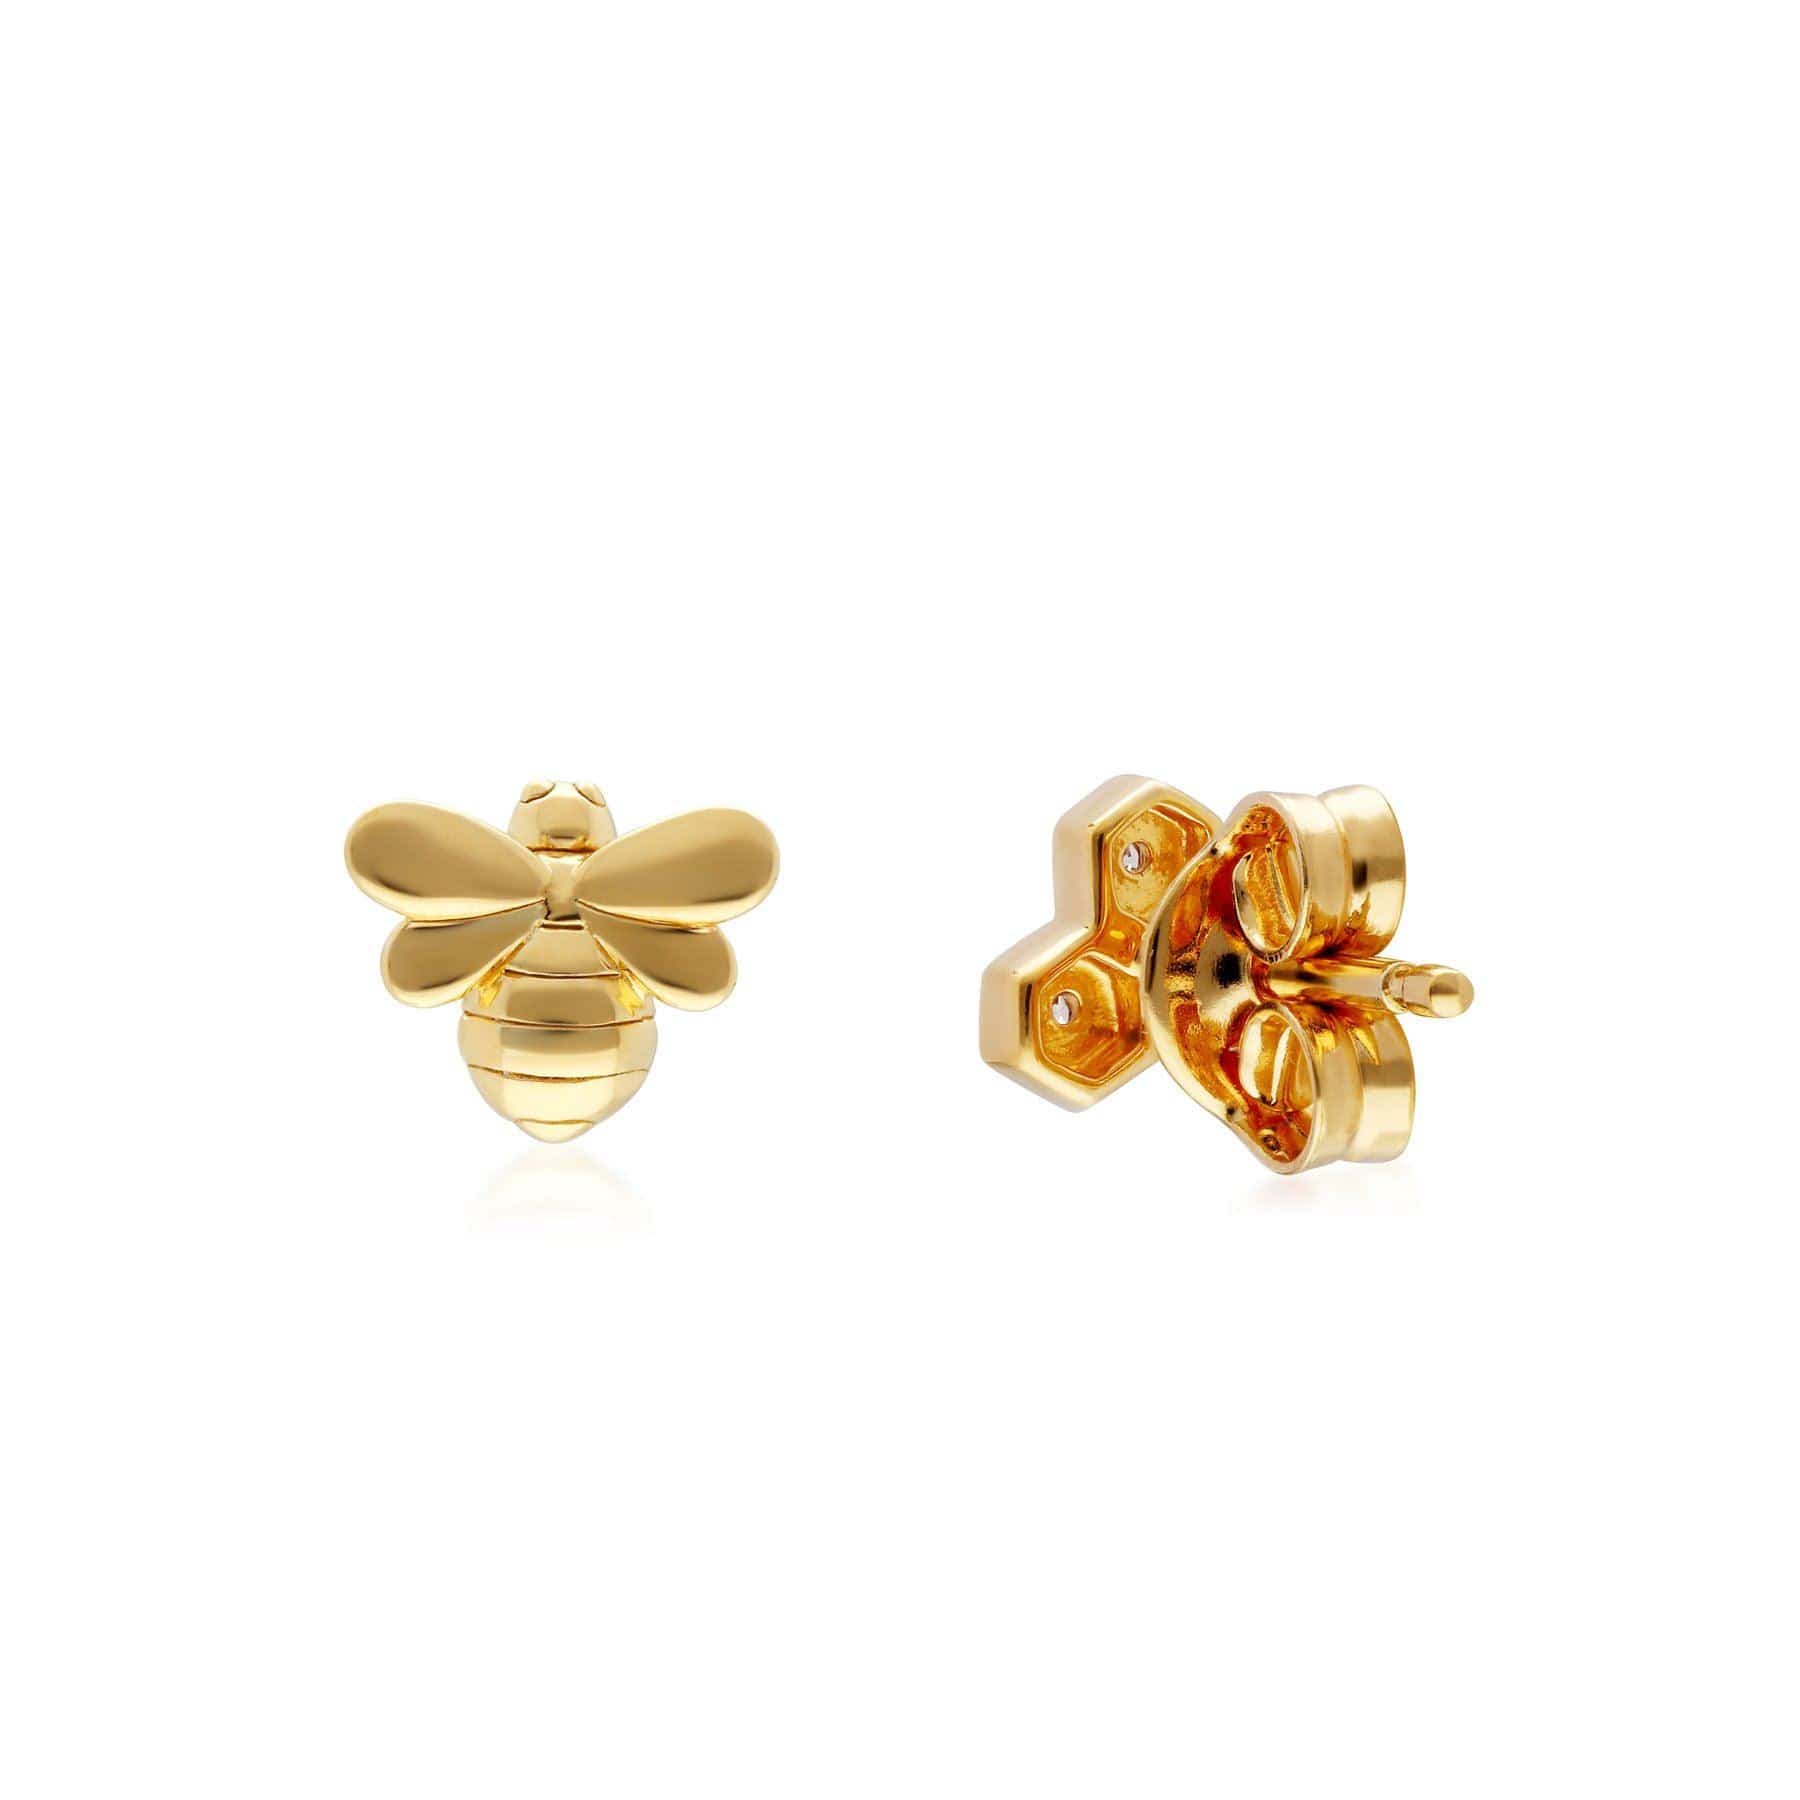 191E0409019 Honeycomb Inspired Mismatched Diamond Bee Earrings in 9ct Yellow Gold 4